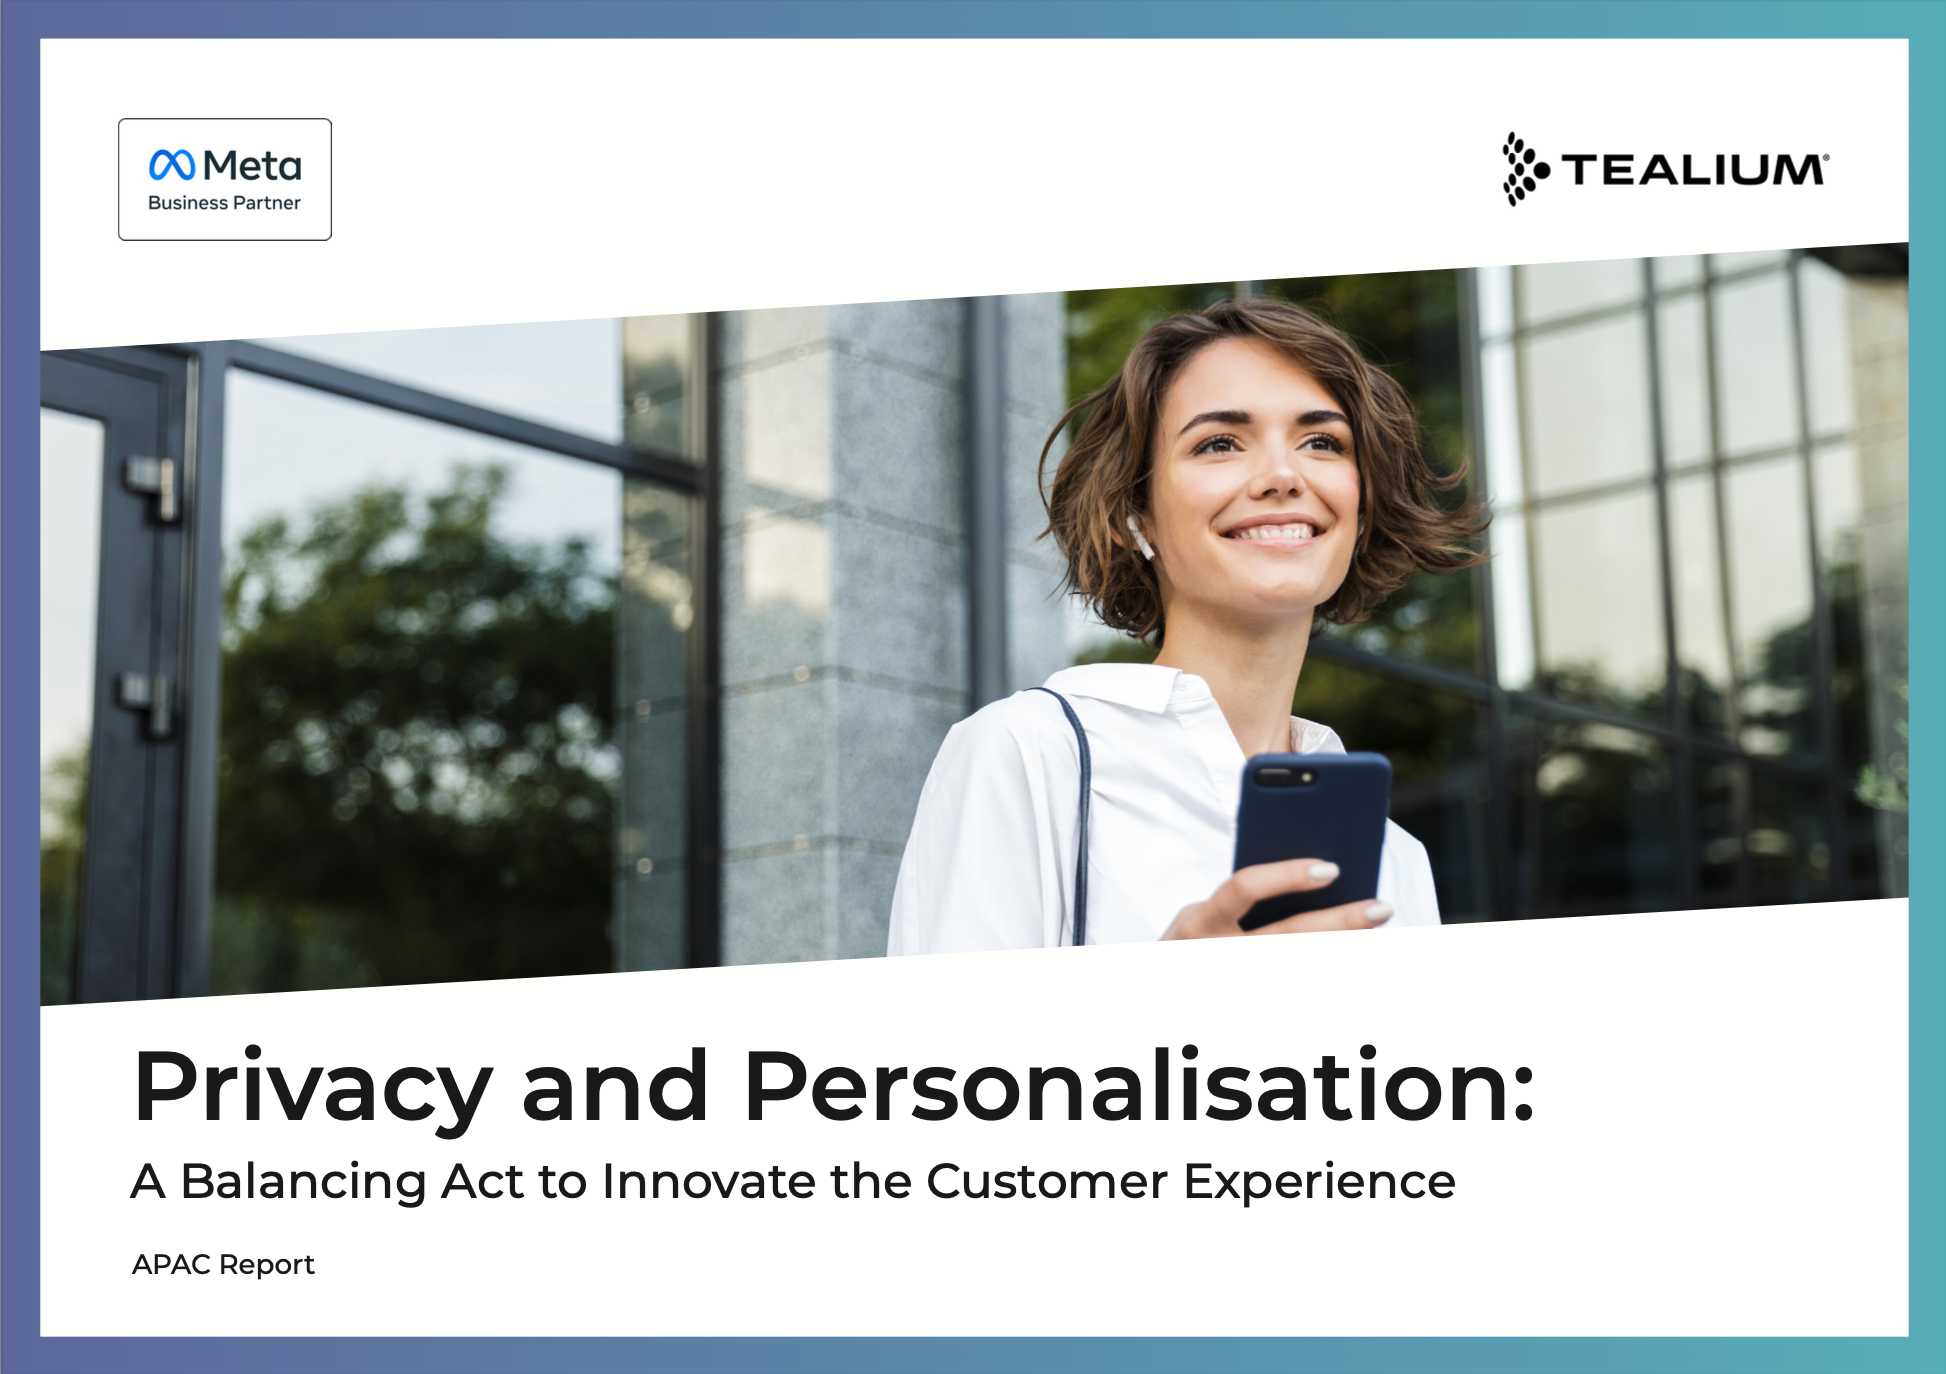 New Tealium and Meta Report Highlights the Importance of Privacy-First Principles to CX Innovation